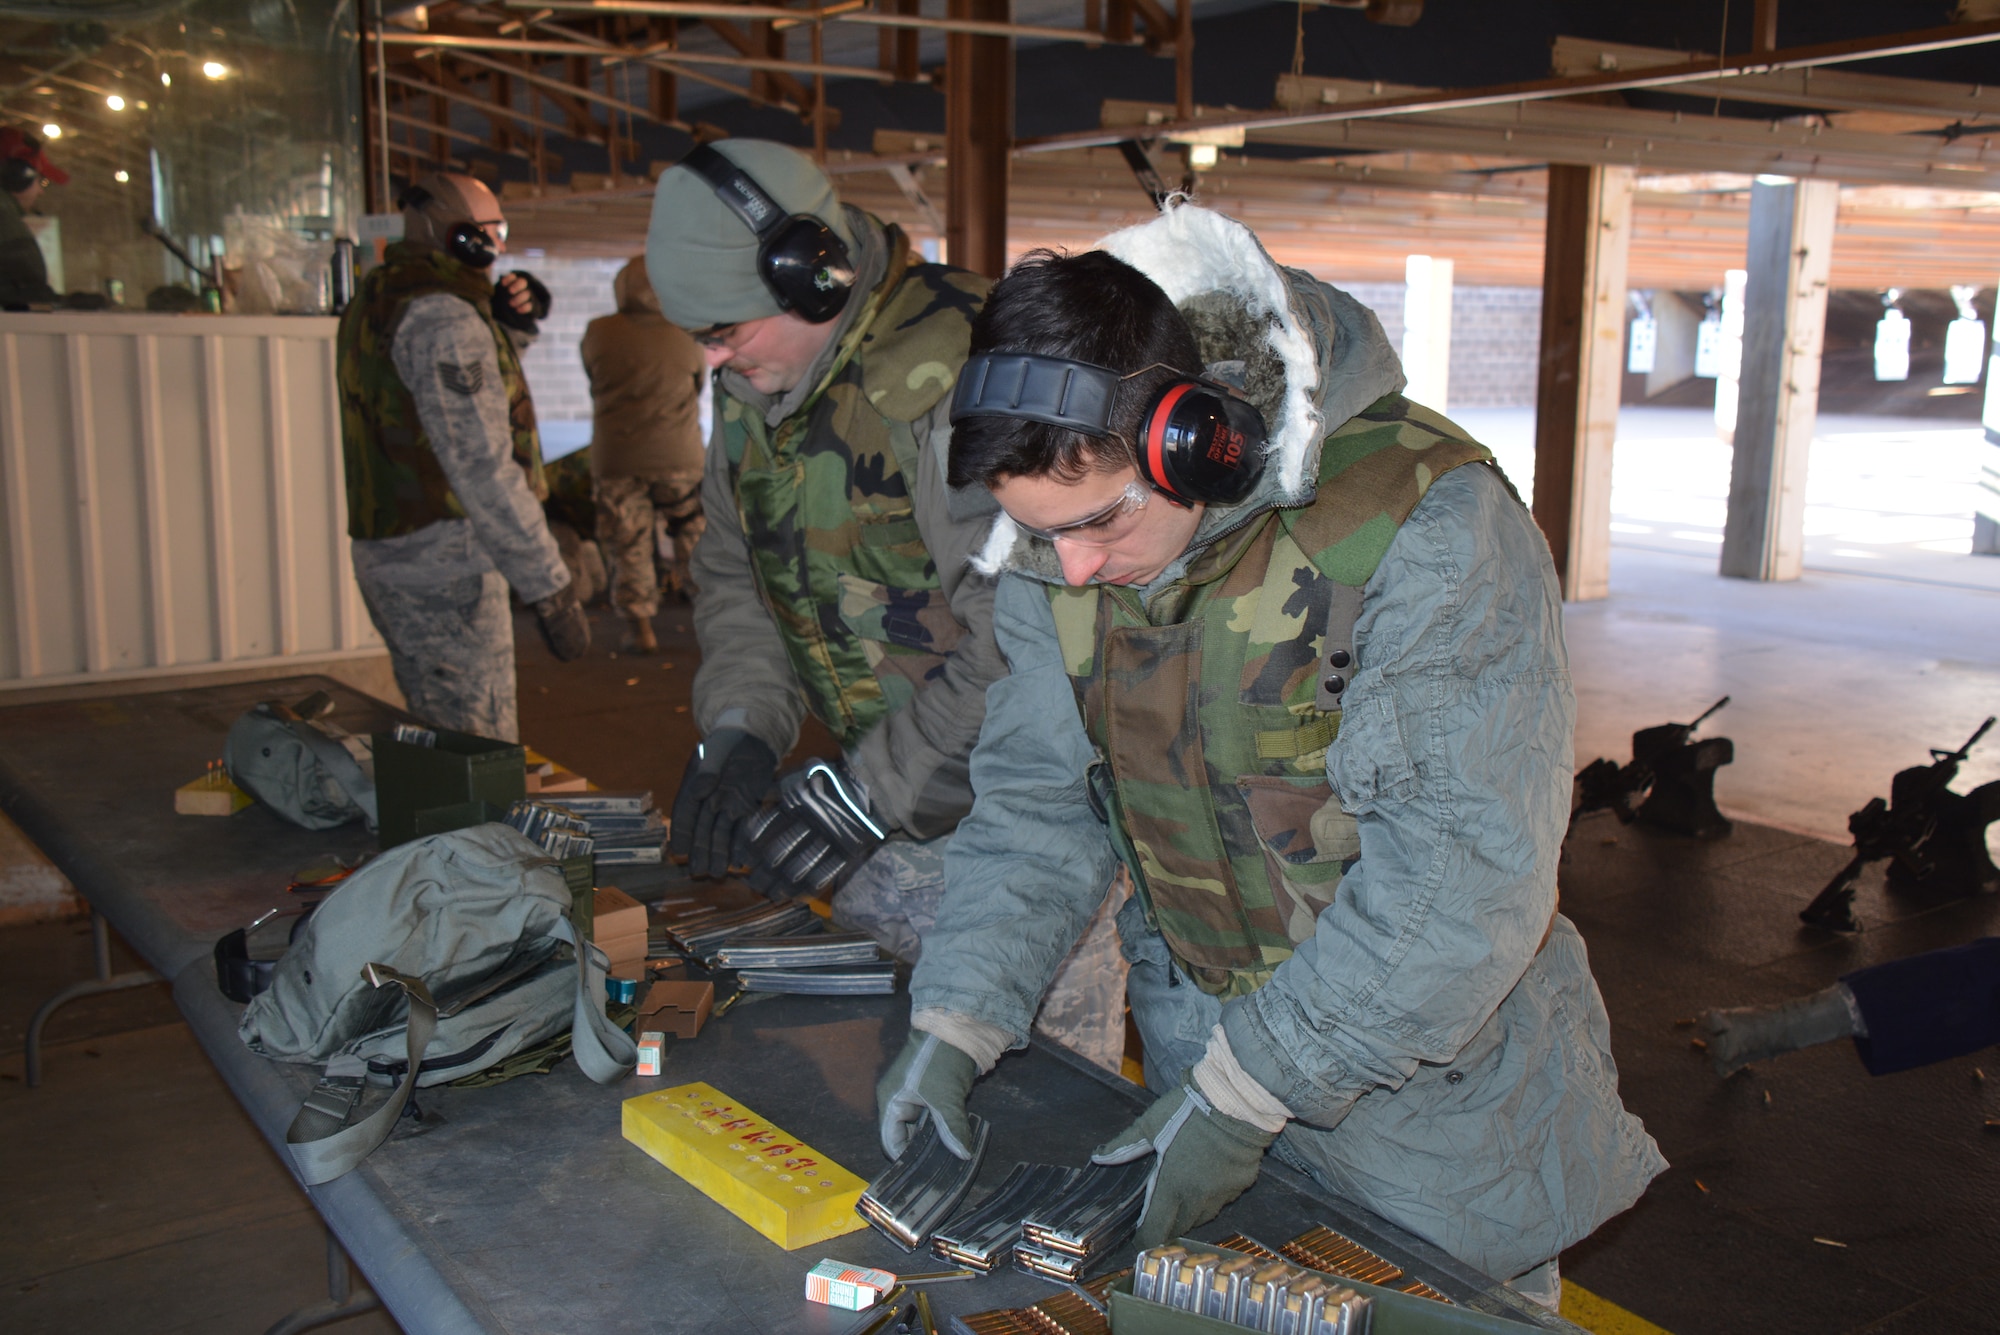 160110-F-OW851-026
Airmen from the 507th Air Refueling Wing load ammunition into magazines in below freezing temperatures Jan. 10, 2016, at the gun range at Tinker Air Force Base, Okla. Airmen are required to demonstrate their proficiency on the M-4 carbine by completing combat arms training, through classroom instruction and hands-on training on the firing range. (U.S. Air Force photo/Tech. Sgt. Charles Taylor)
